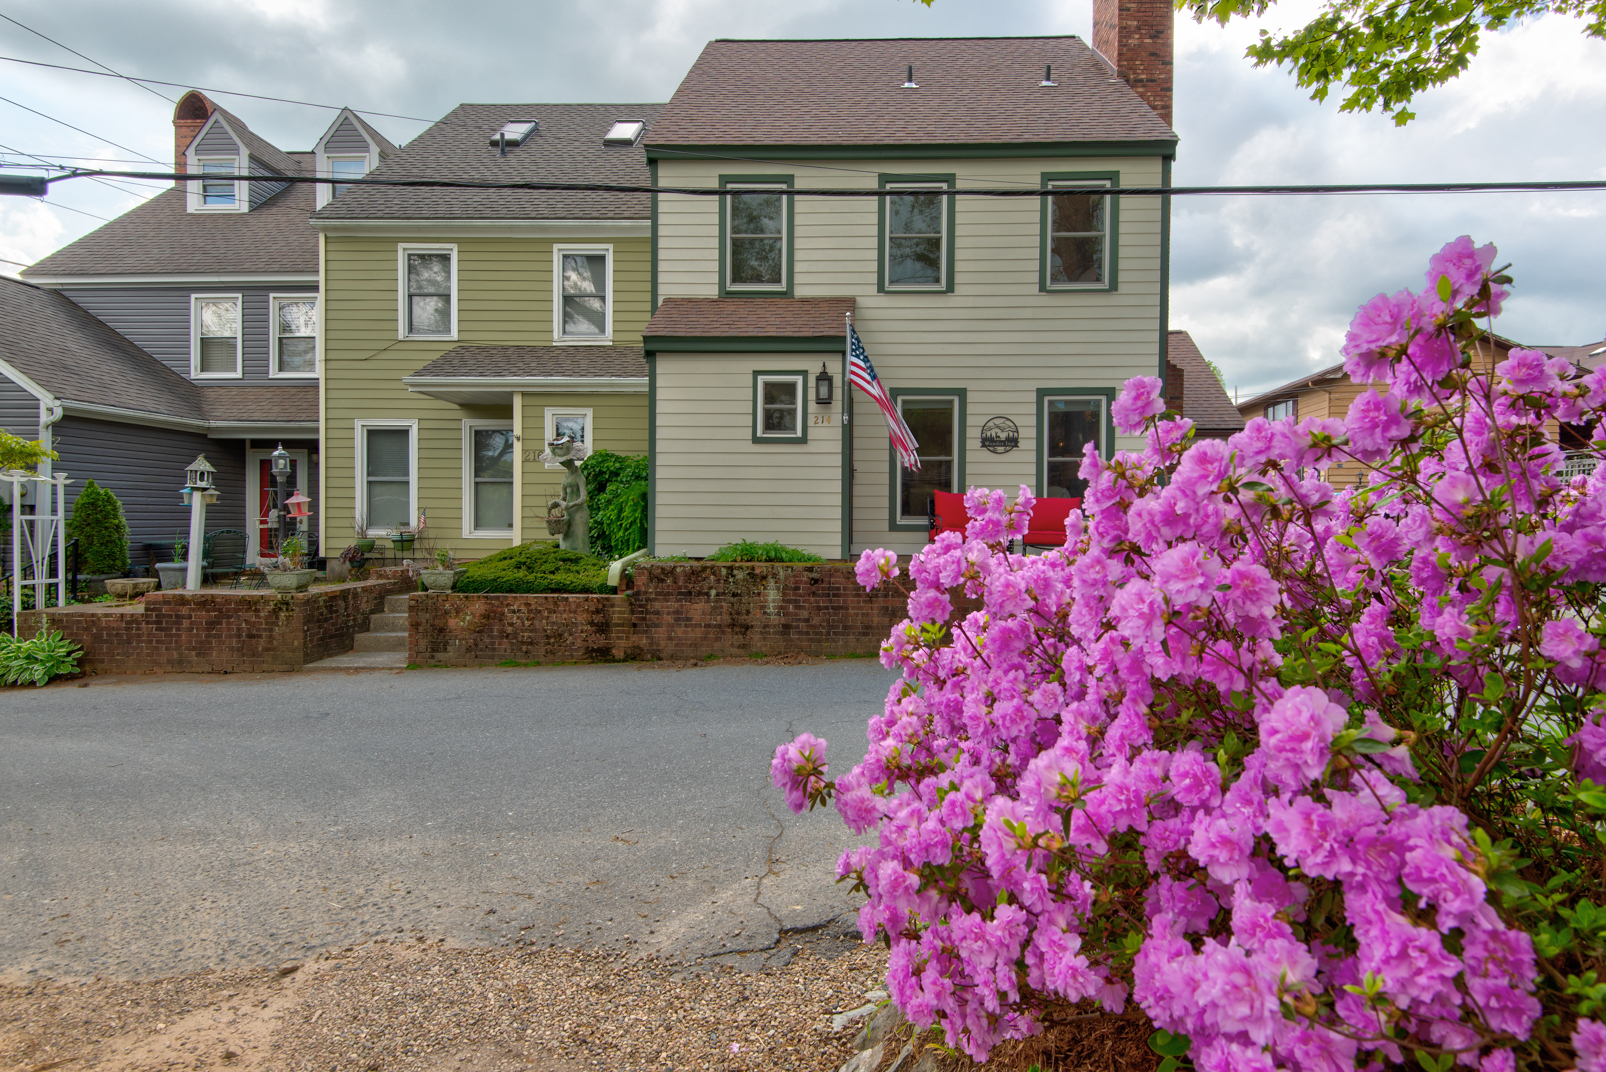 The Wander Inn - Nestled in the heart of Downtown Blowing Rock, one block to Main Street!